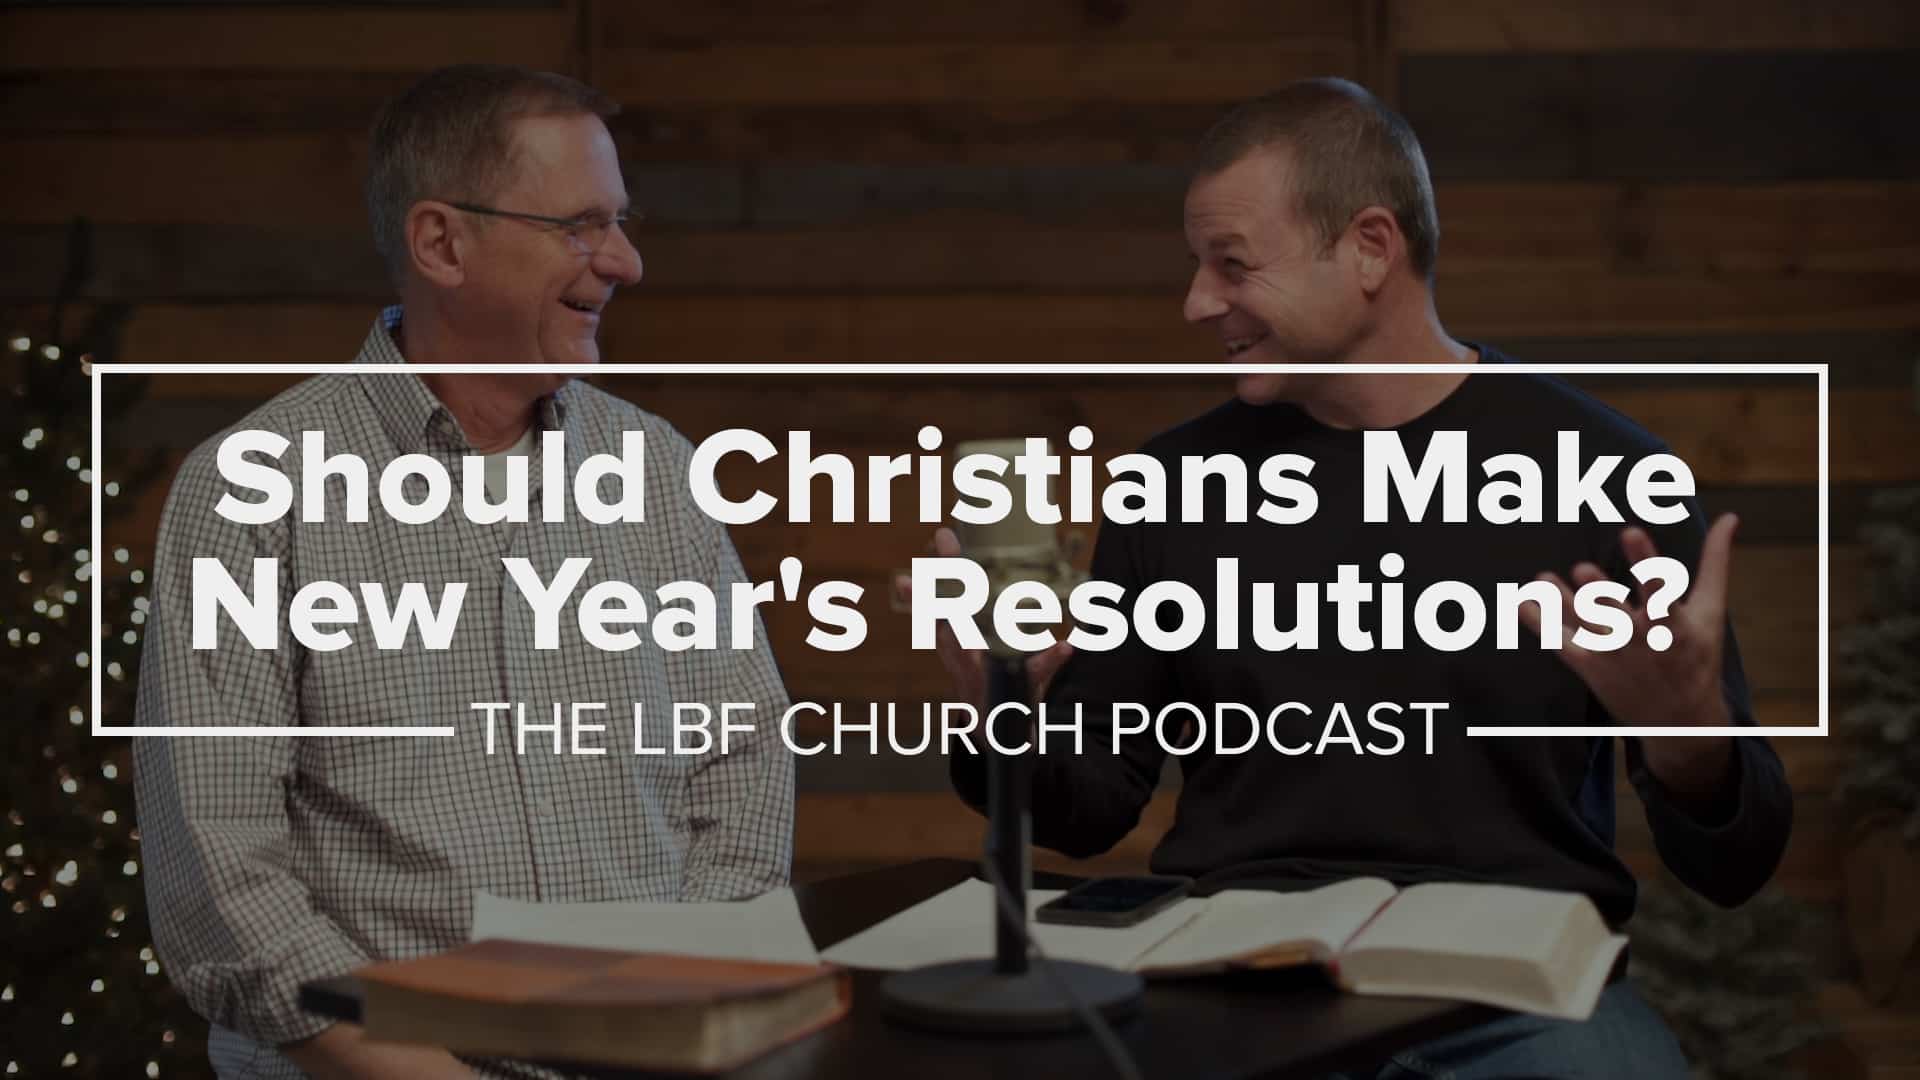 News Year's Resolutions. Should Christians Make Them?